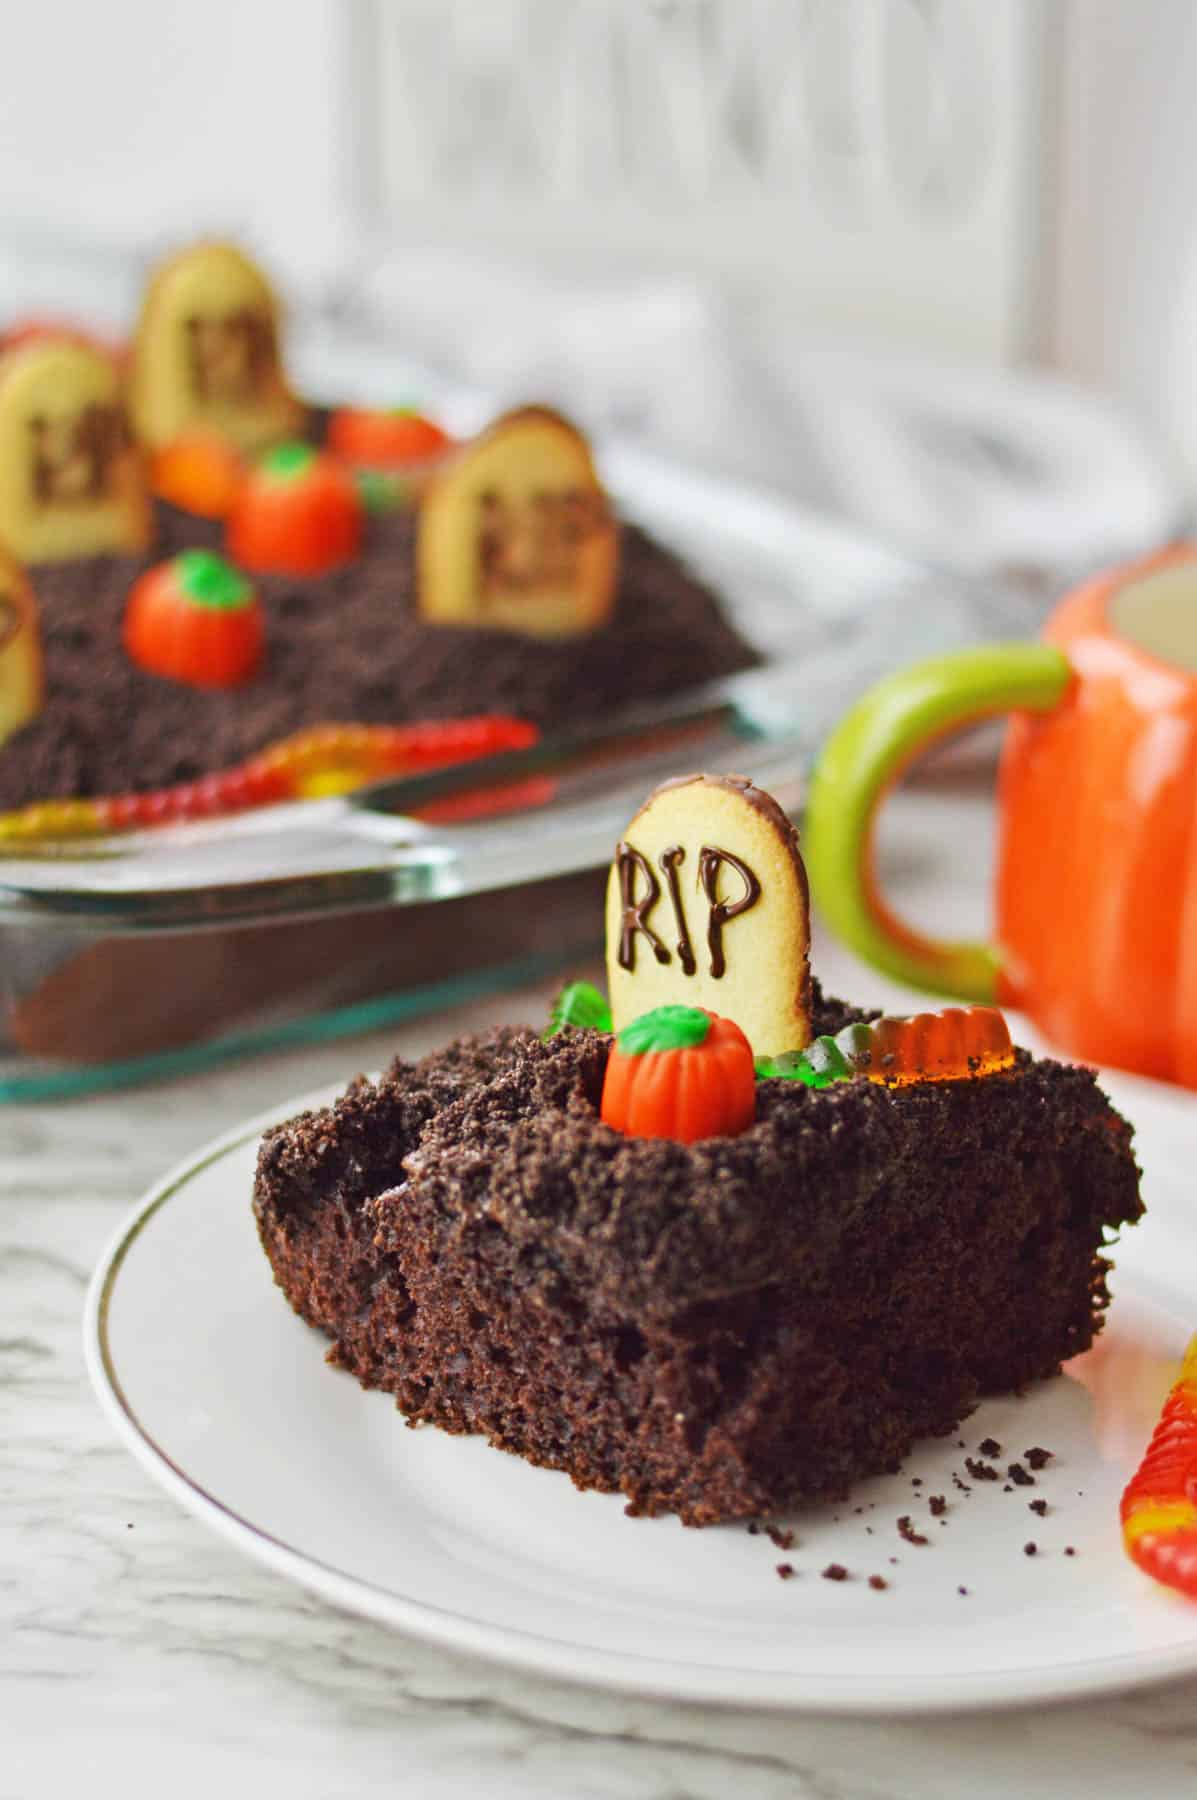 A plate of chocolate cake with pumpkins on it.